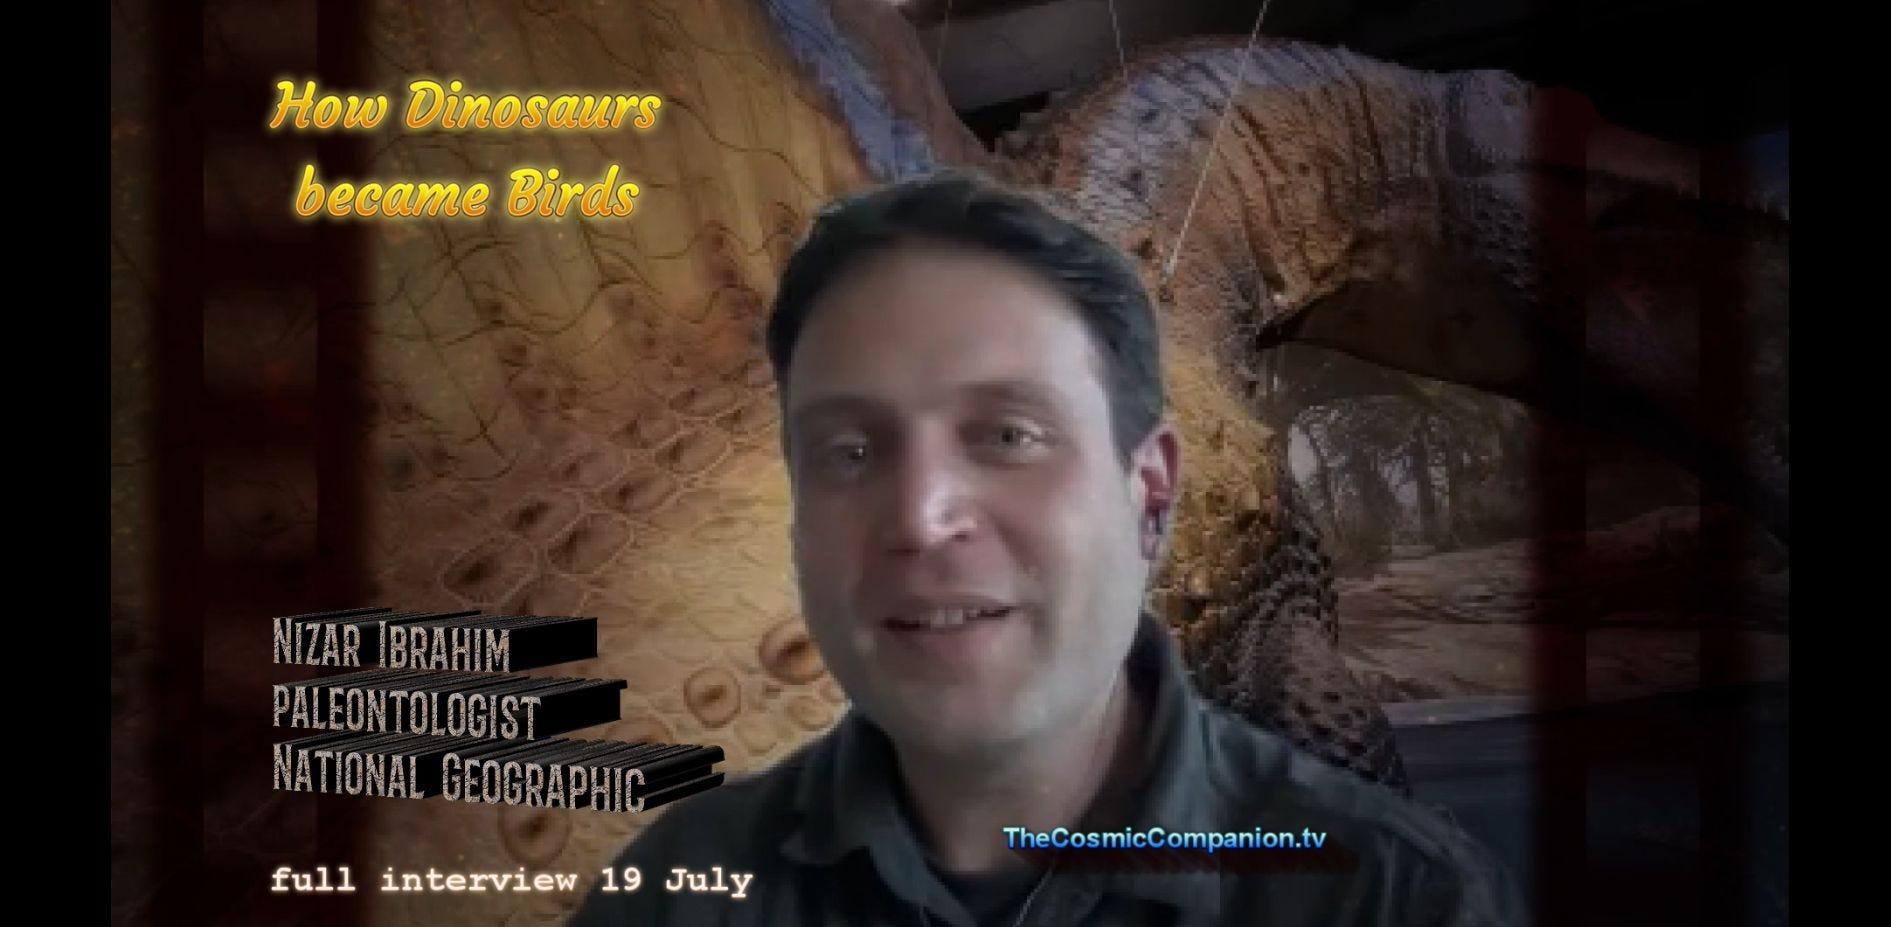 Are We Living in the Age of Dinosaurs? w/ Nat Geo's Nizar Ibrahim - Sneak Preview - The Cosmic Companion 24 June 2022